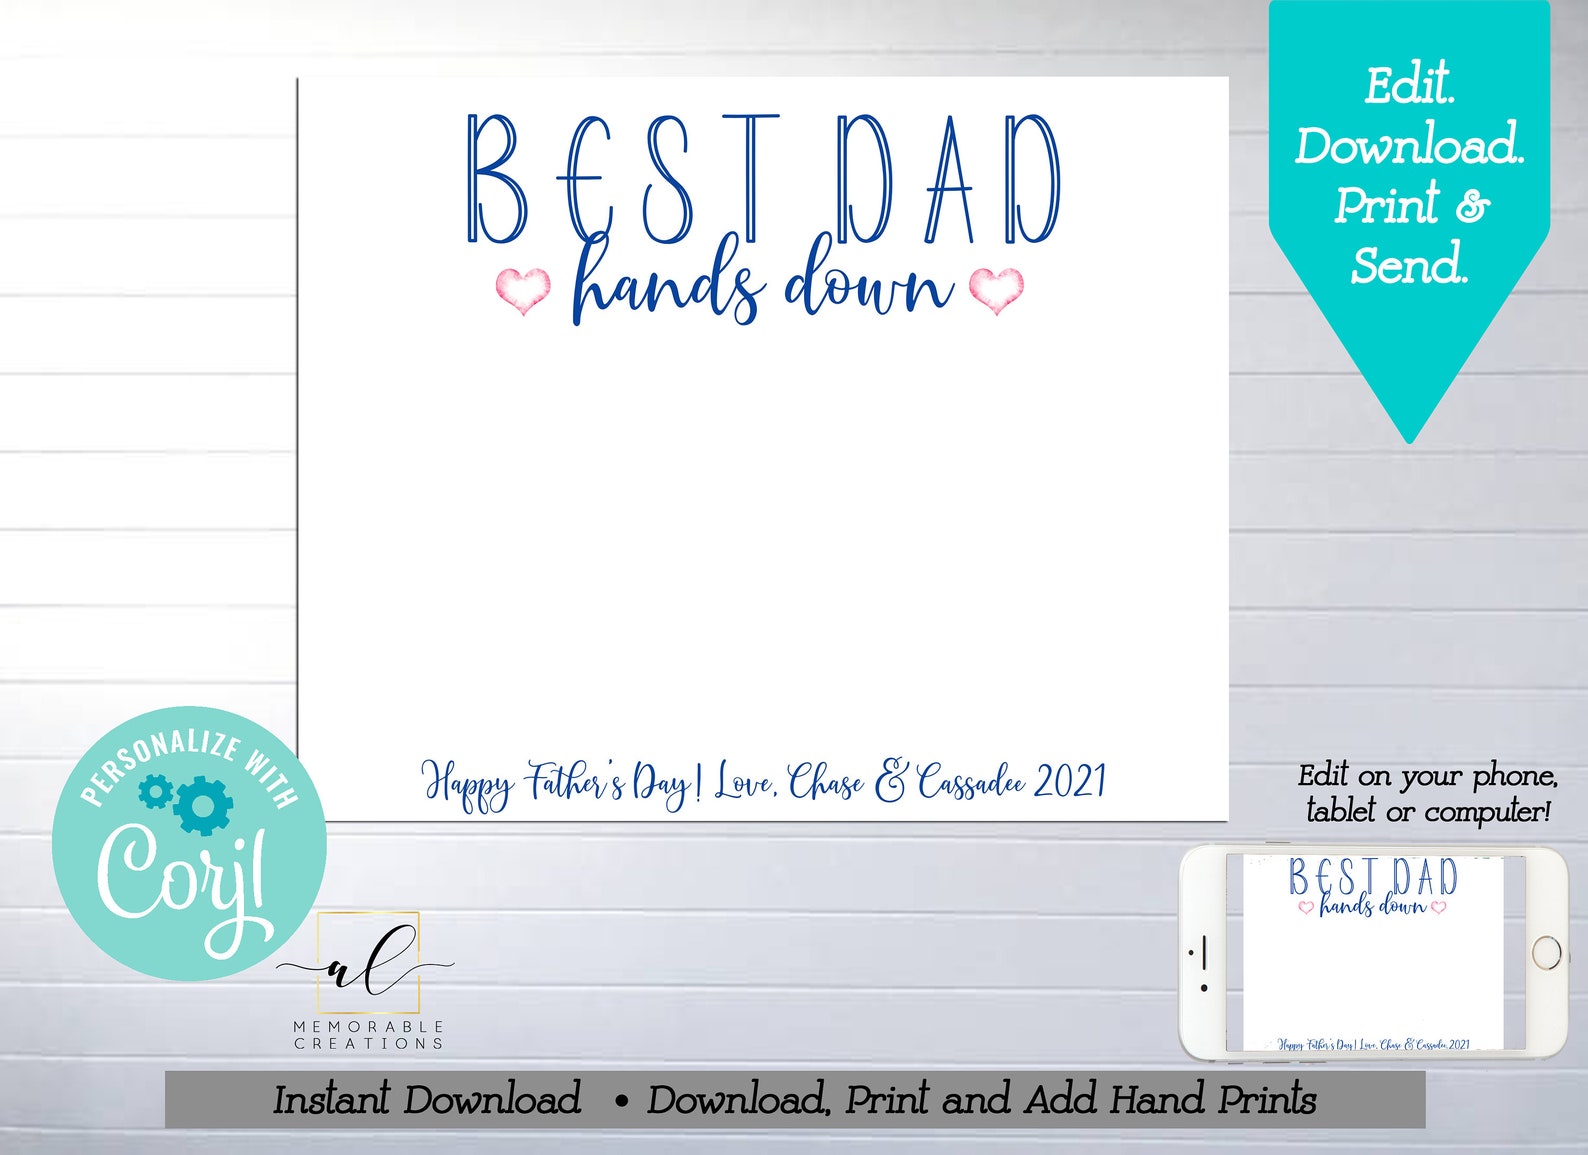 best-dad-hands-down-editable-sign-edit-yourself-hand-print-etsy